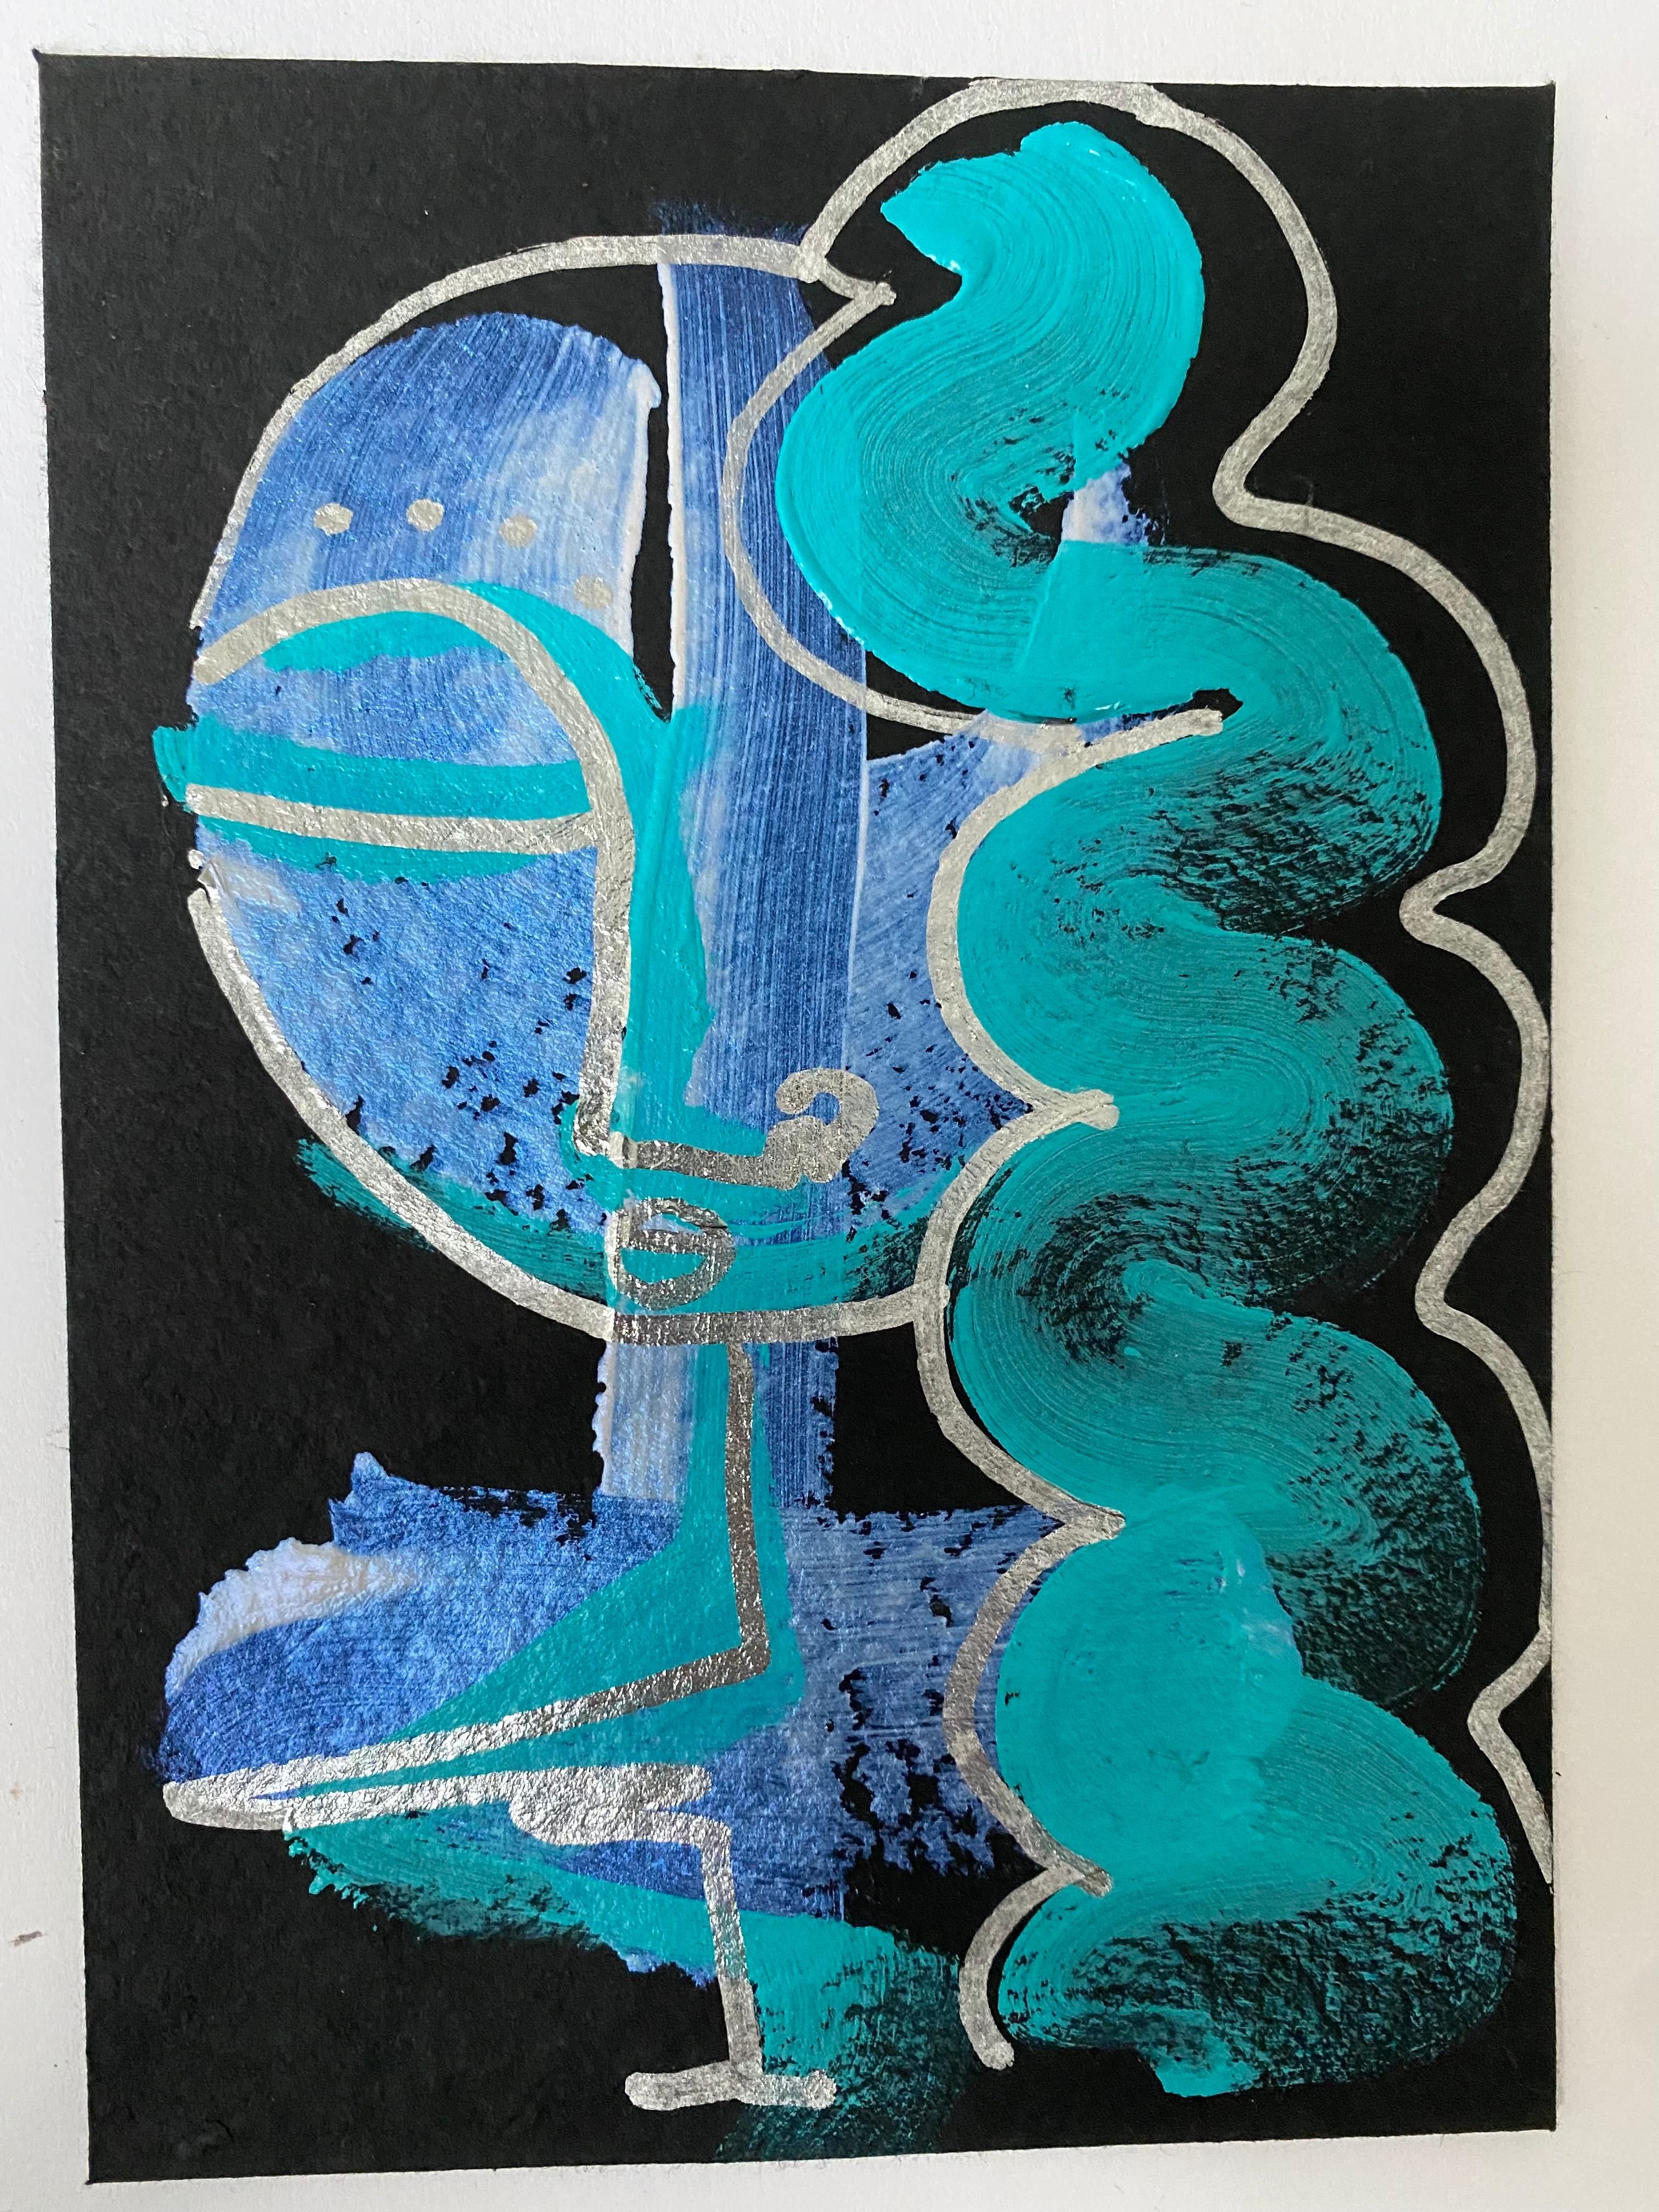 Reflections, Silver and teal on black archival paper by Alice Mizrachi